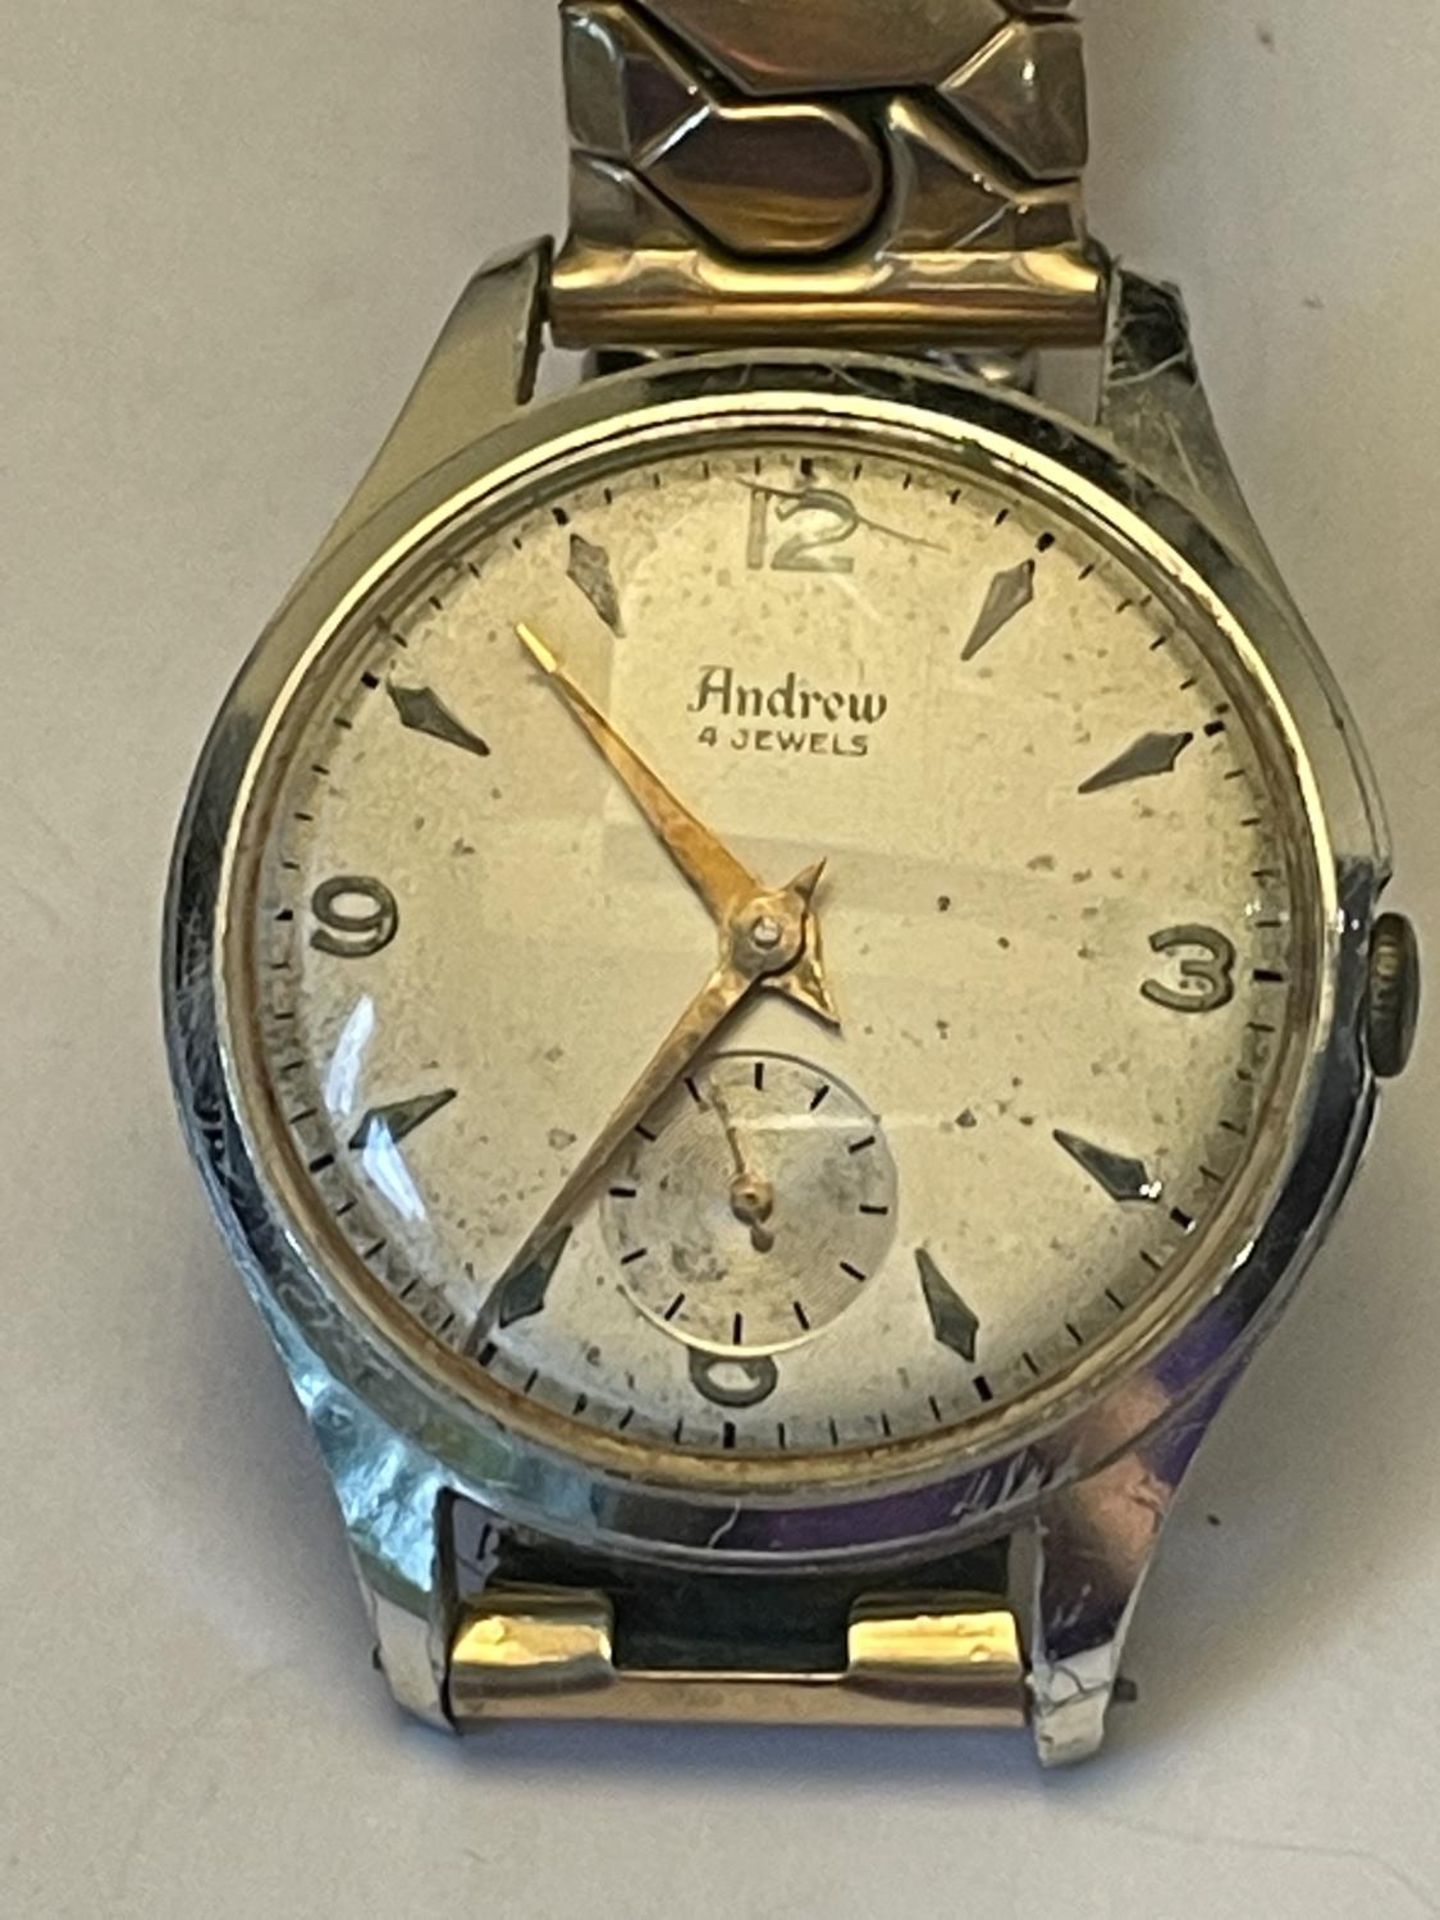 A VINTAGE ANDREW 4 JEWELS WRISTWATCH SEEN WORKING BUT NO WARRANTY - Image 2 of 3